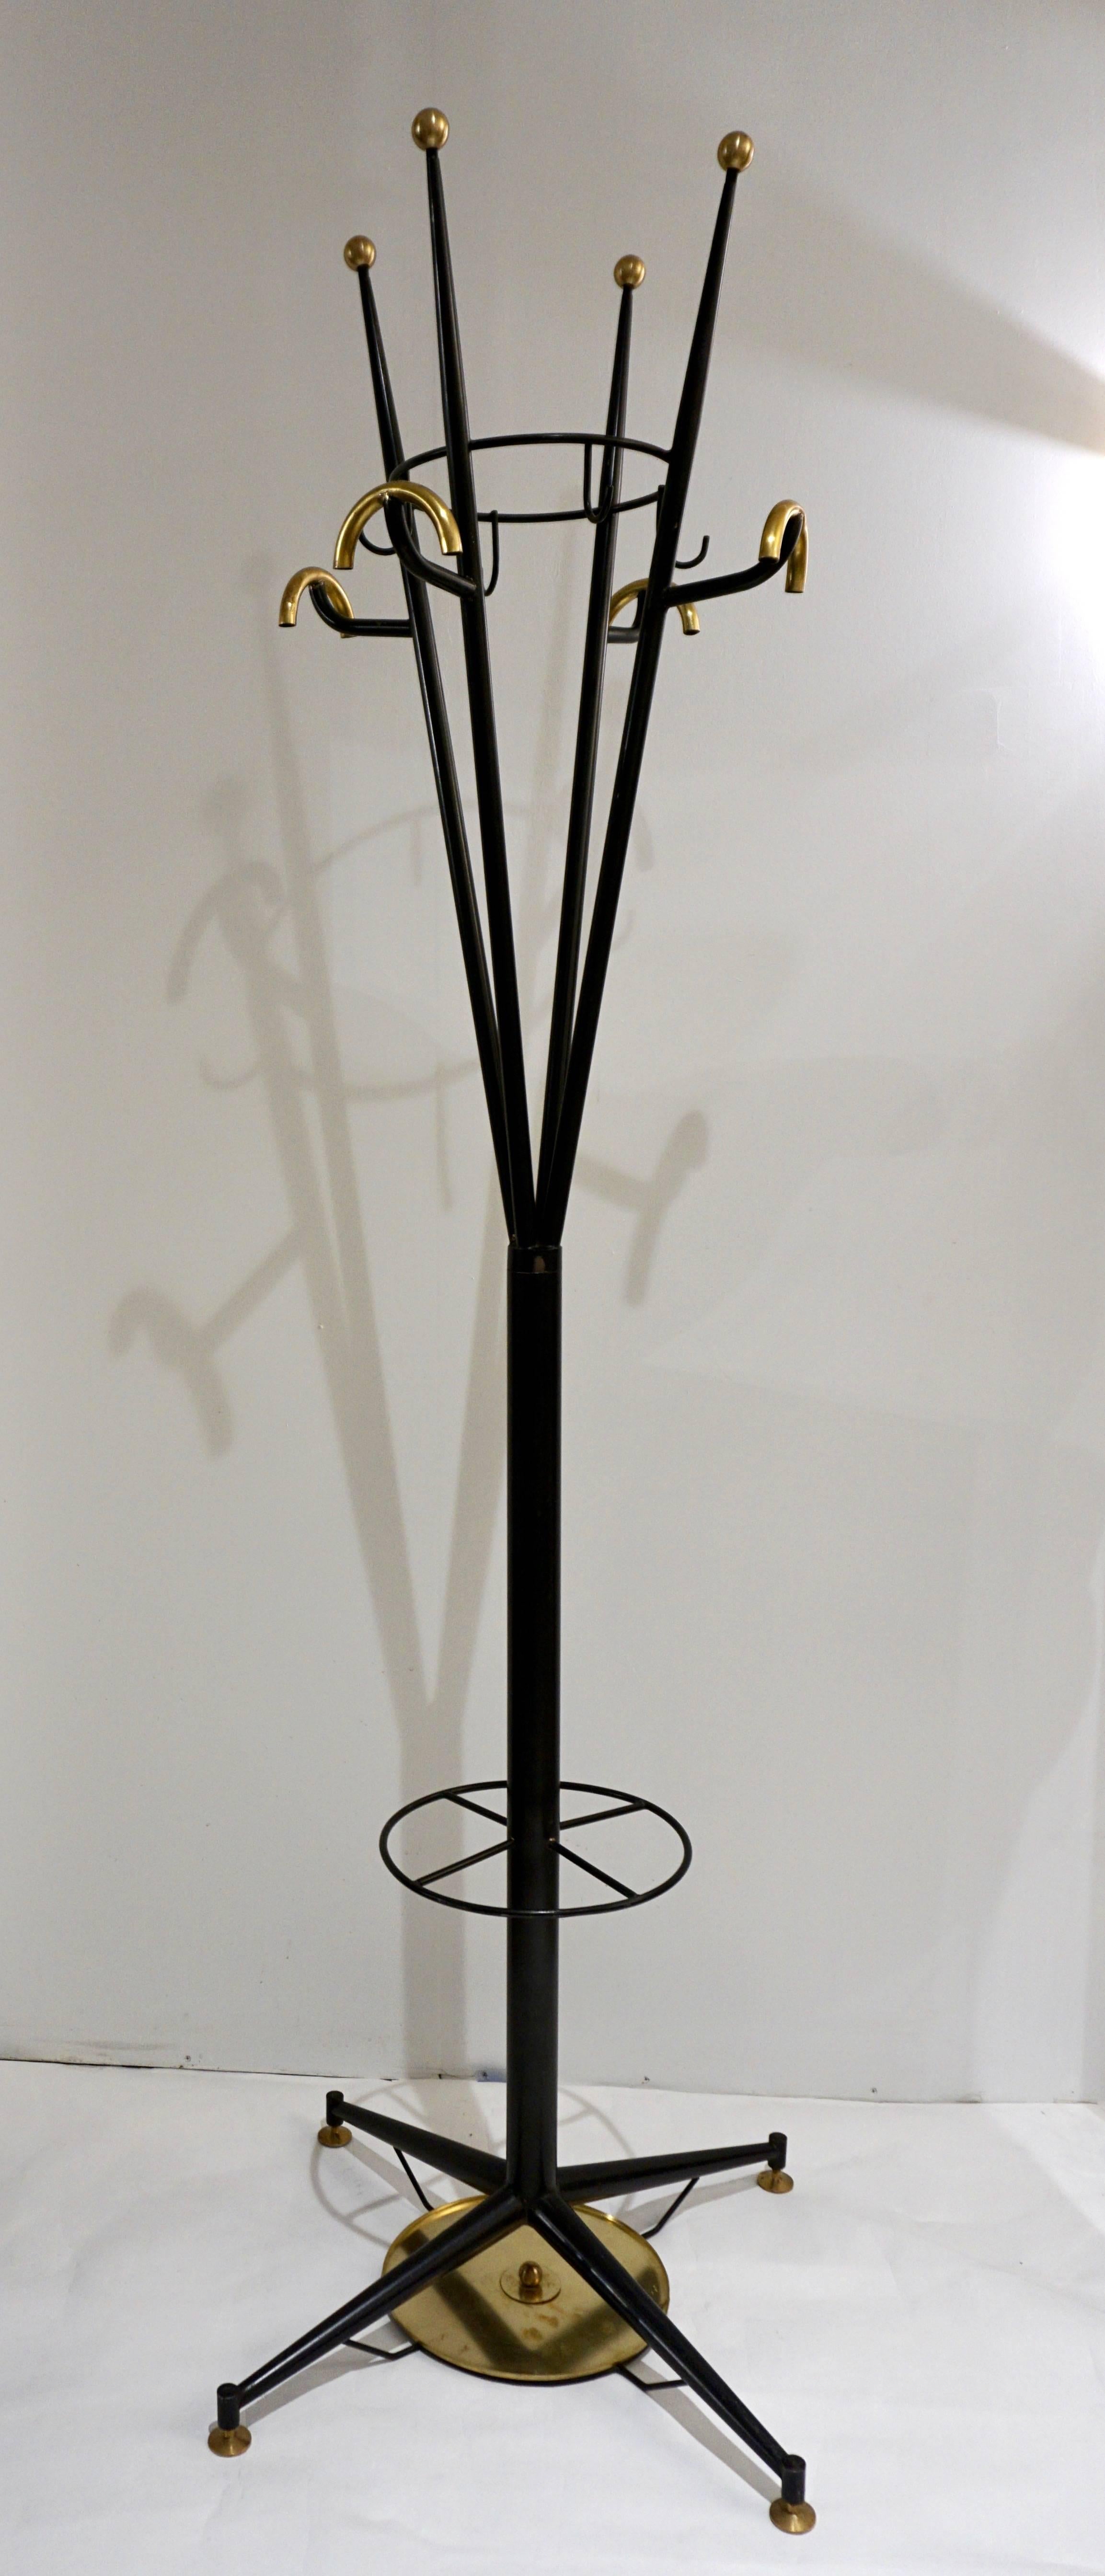 1980s Italian Modern Black Lacquered and Gold Brass Coat Rack or Umbrella Stand 1